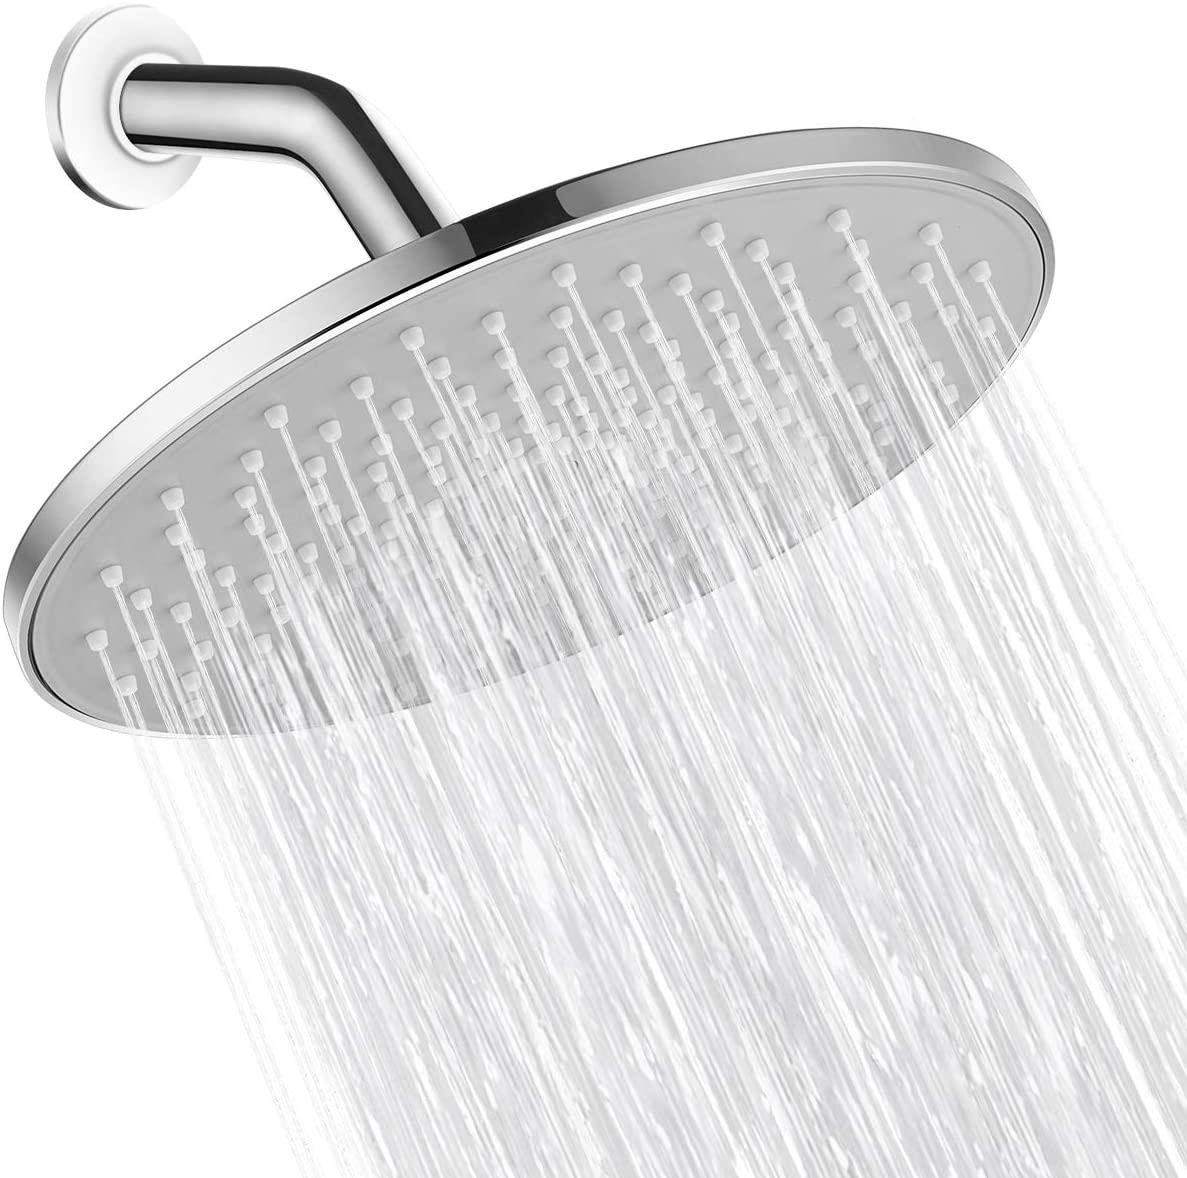 9 best shower heads: Practical designs to refresh any bathroom Register for free to continue reading